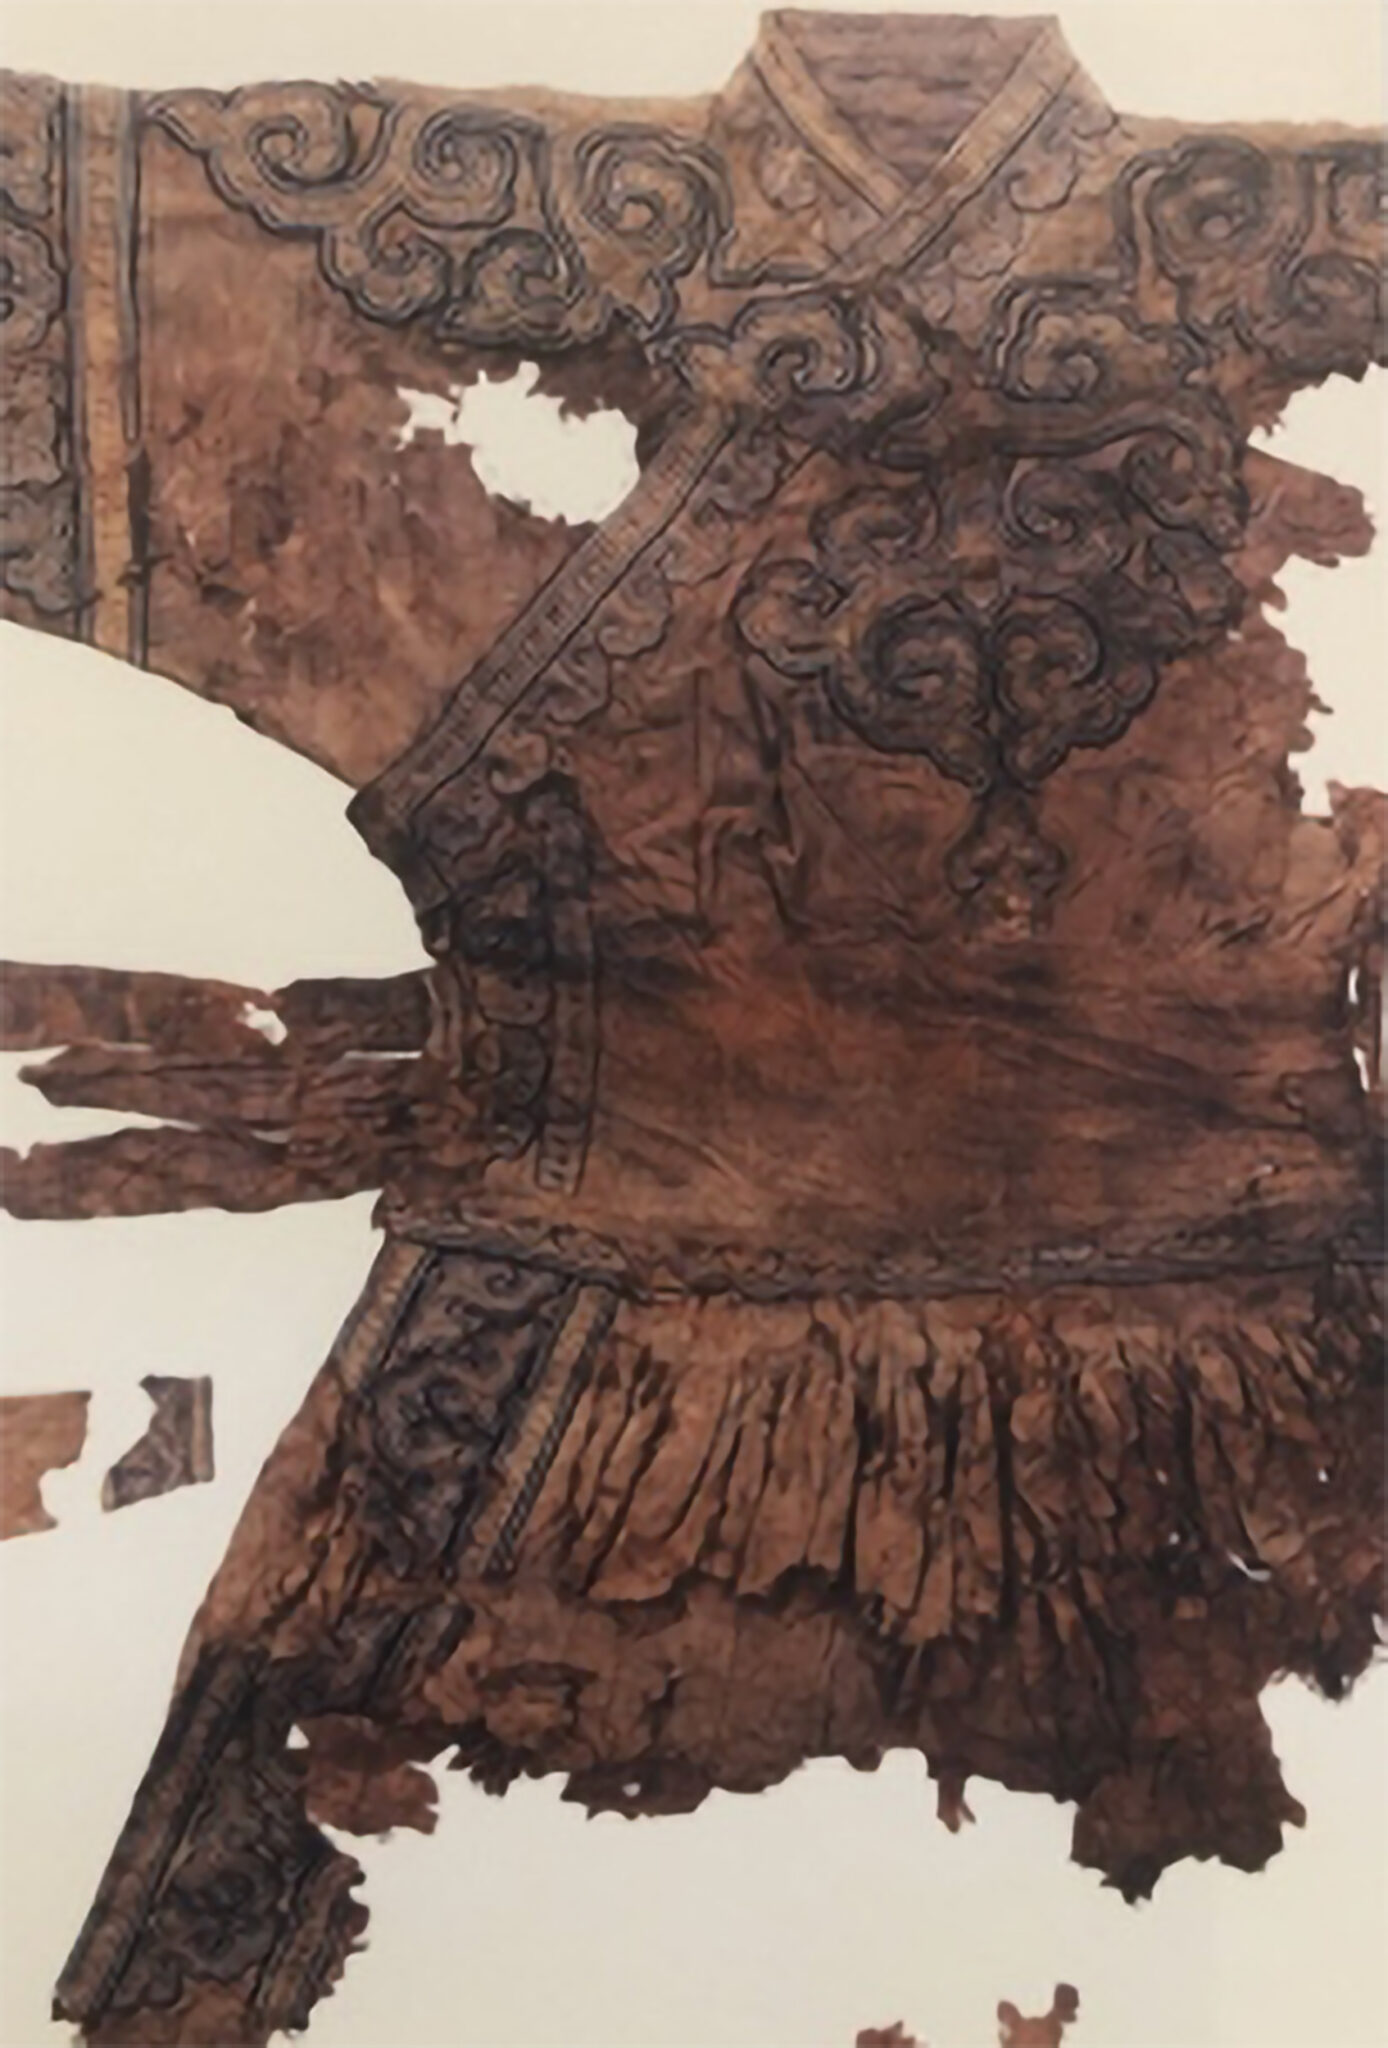 Fragmentary dark-brown tunic featuring swirling cloud motifs at chest and on seams of garment